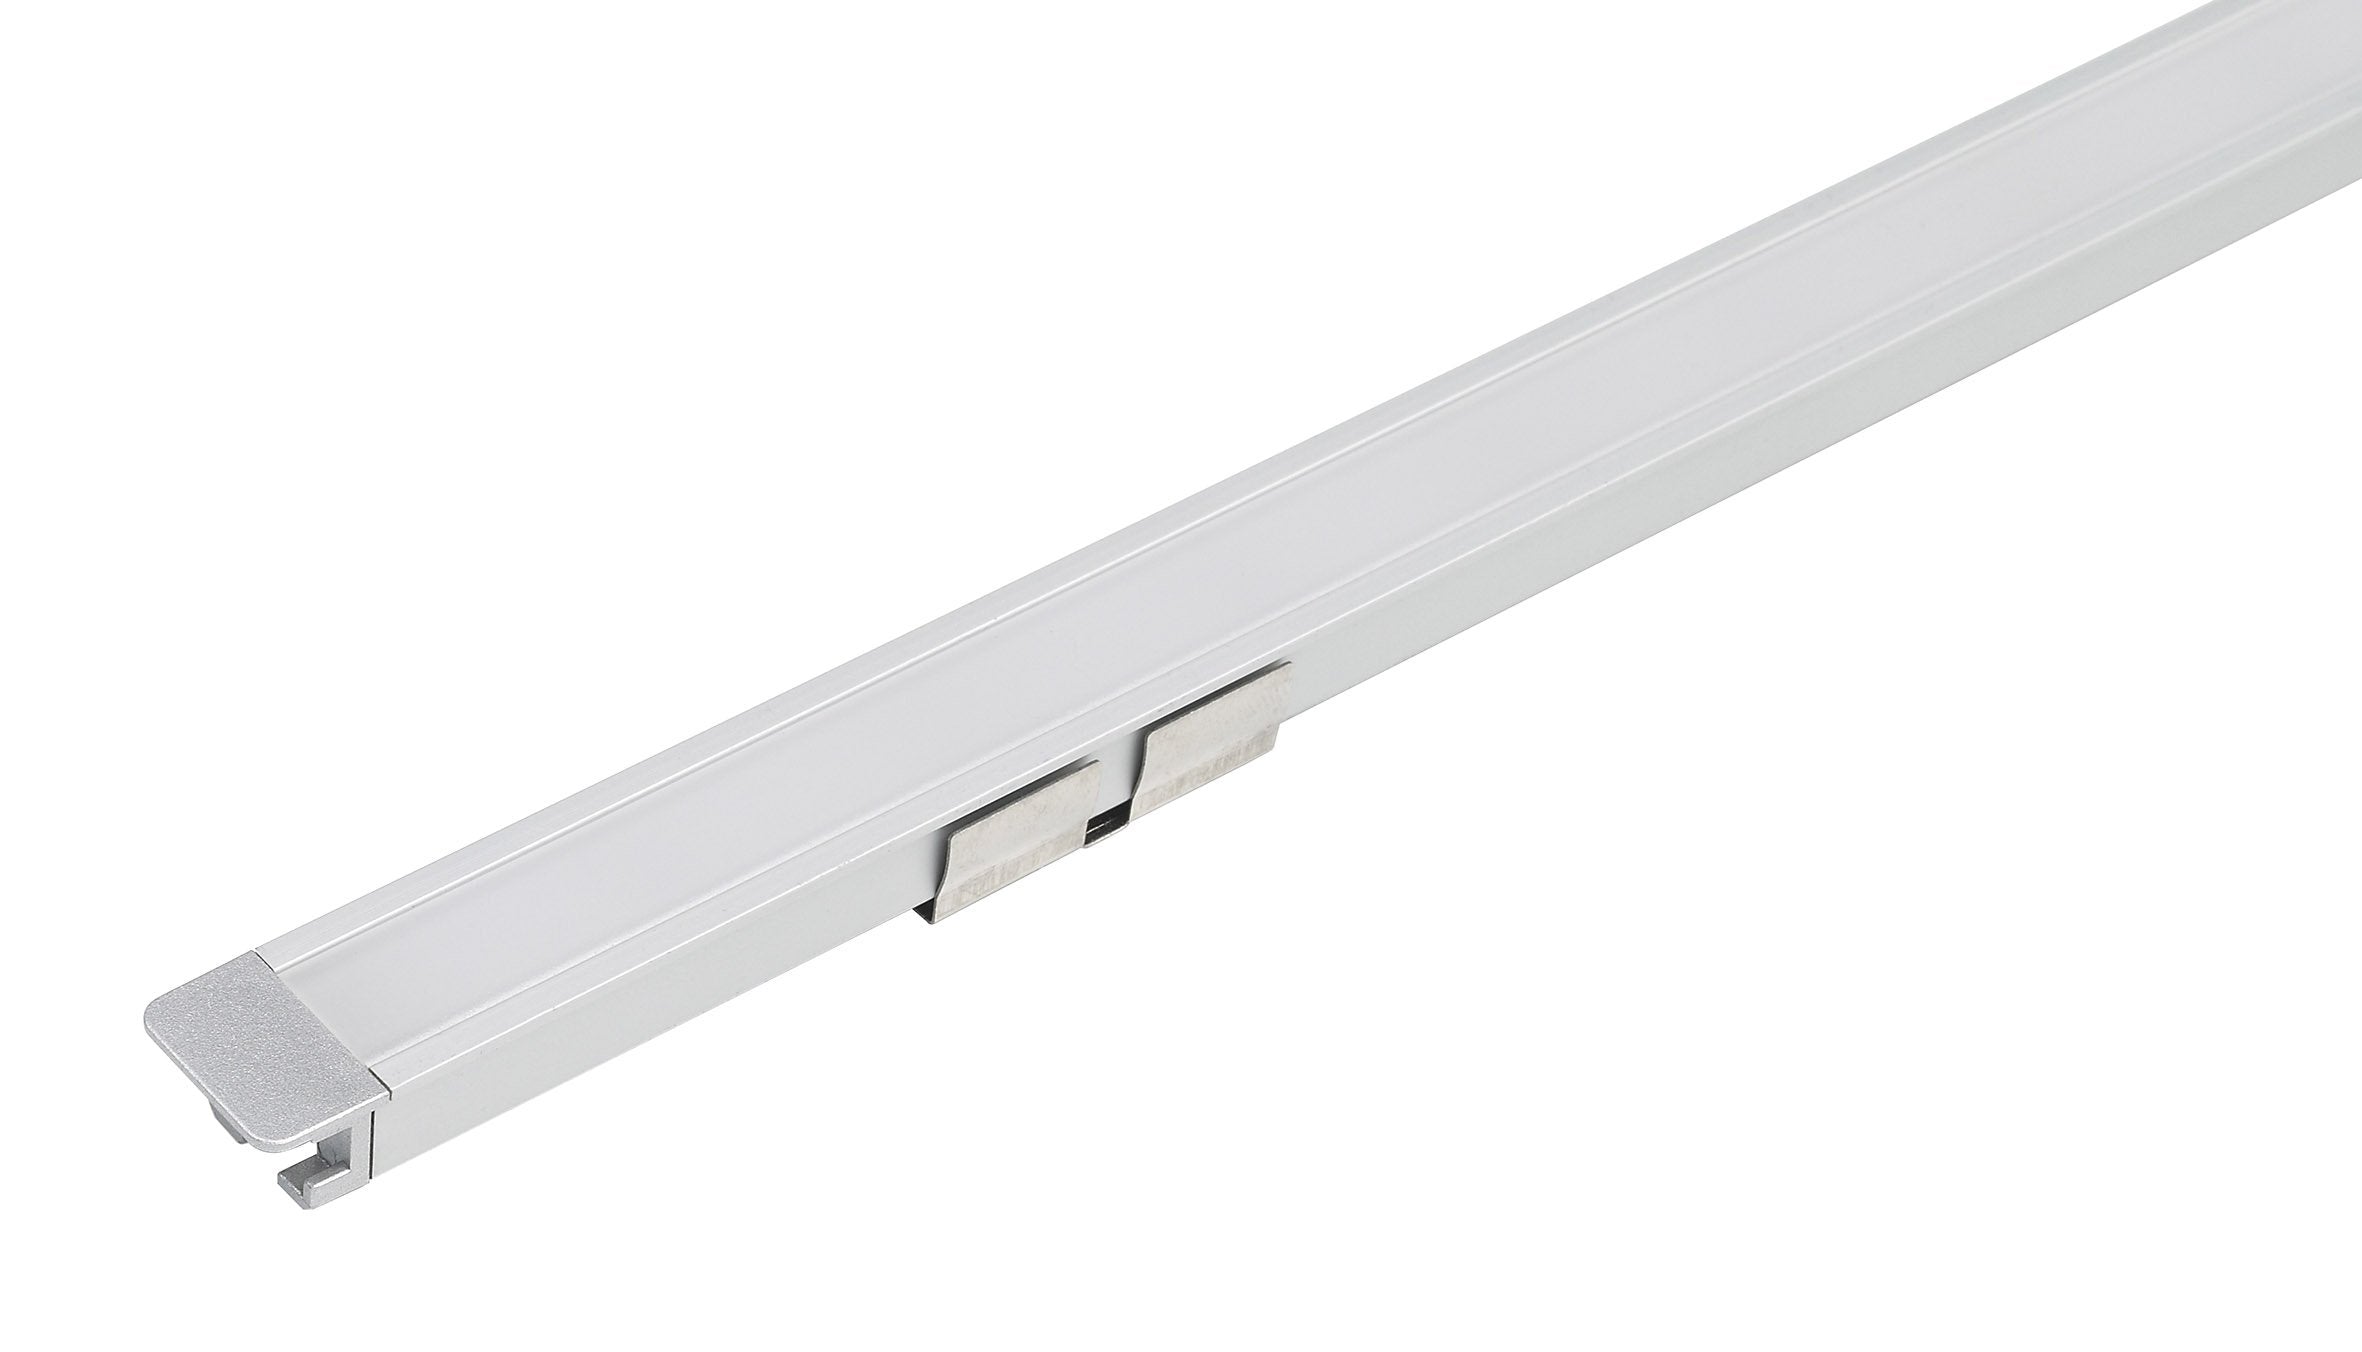 UNR RECESSED 2M LENGTH WITH FROSTED DIFFUSER